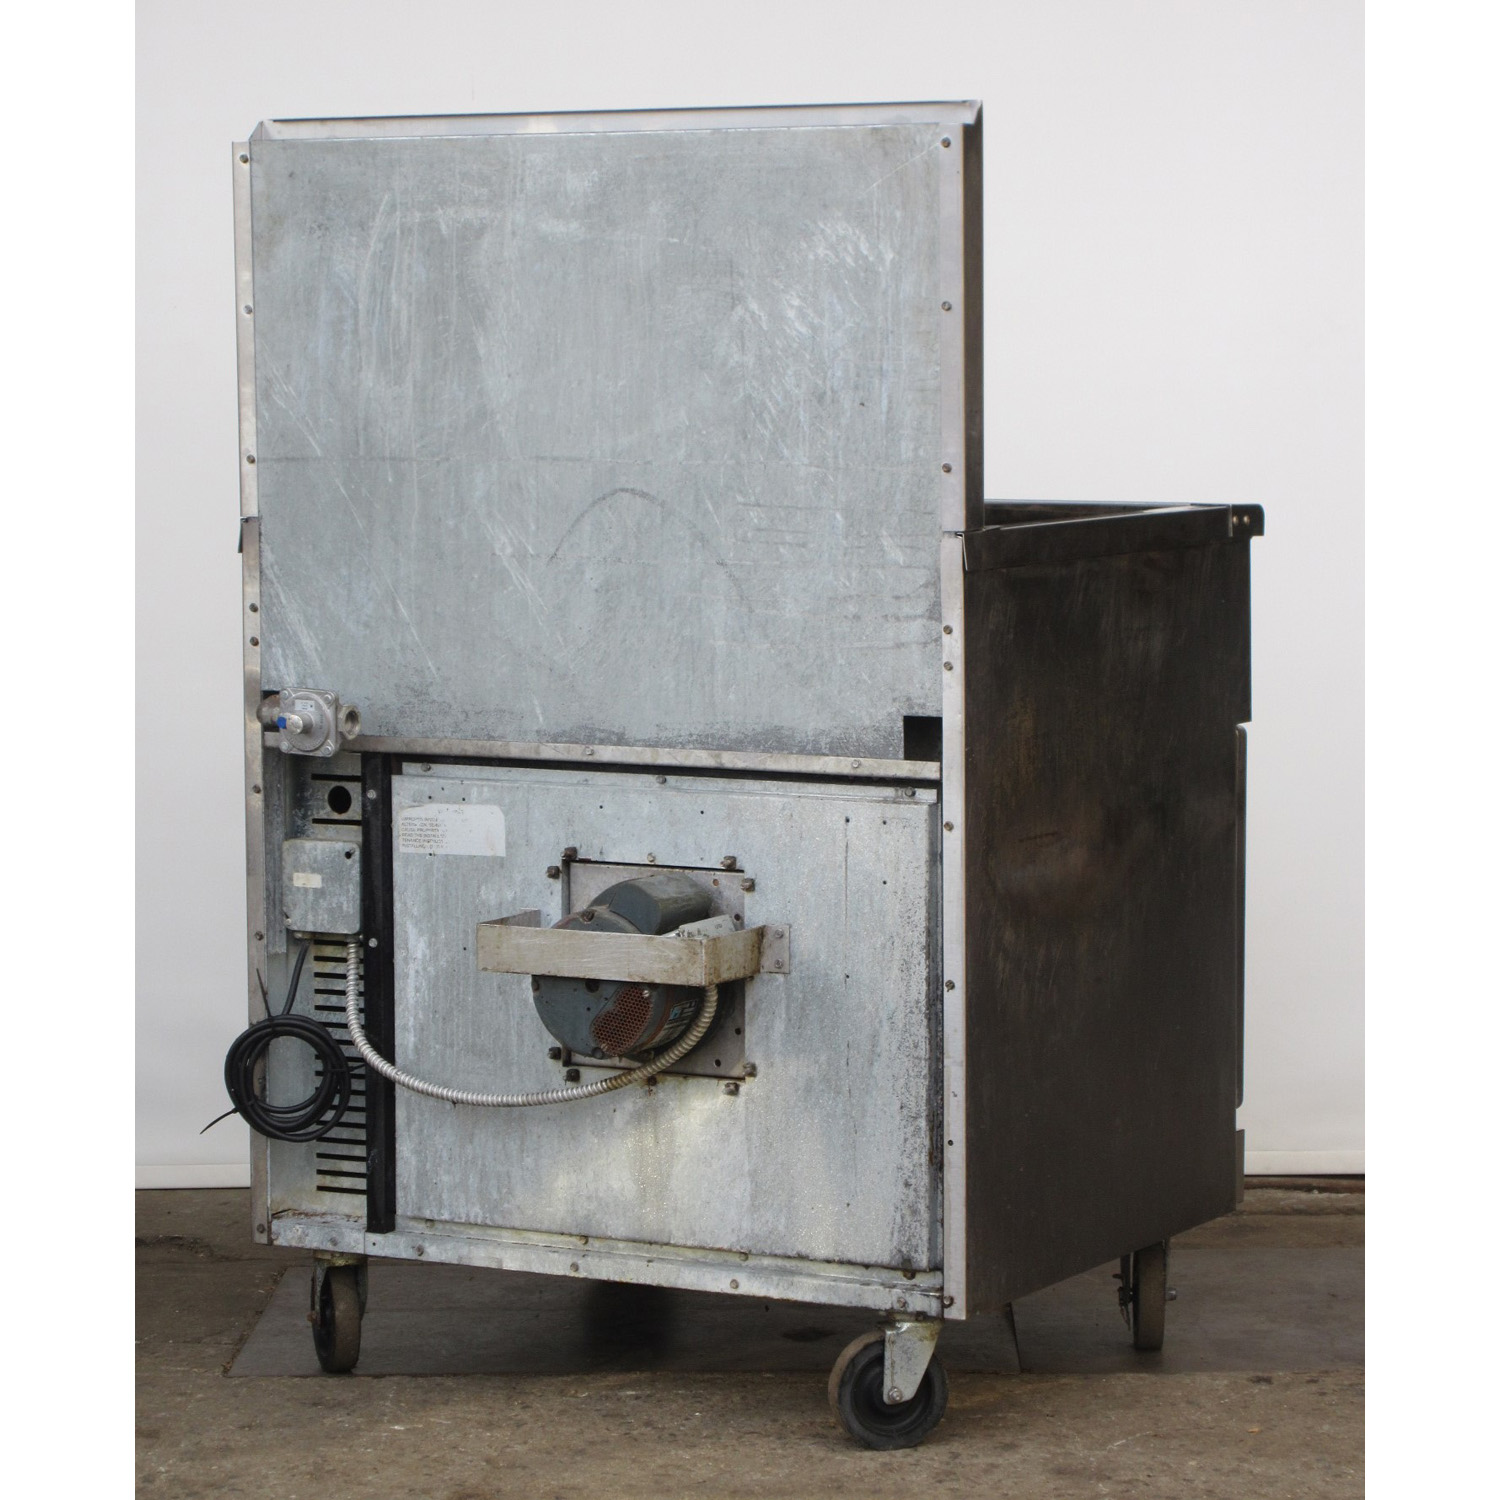 Imperial IR-36BR-C Radiant Broiler Range with Convection Oven Gas, Excellent Condition image 3